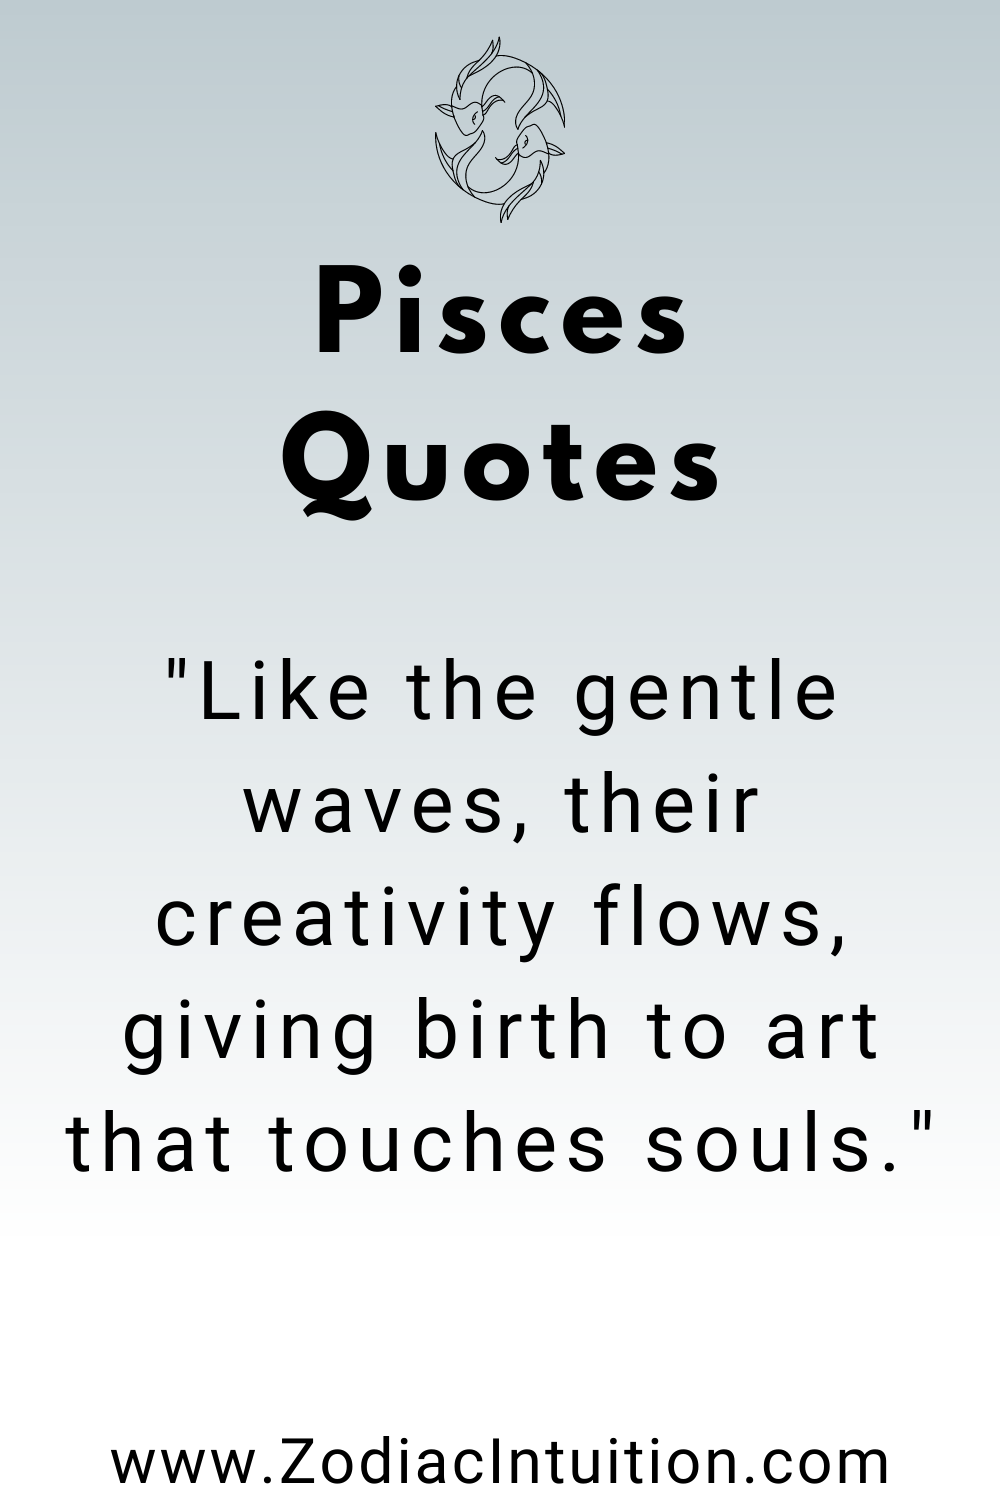 Top 5 Pisces Quotes And Inspiration